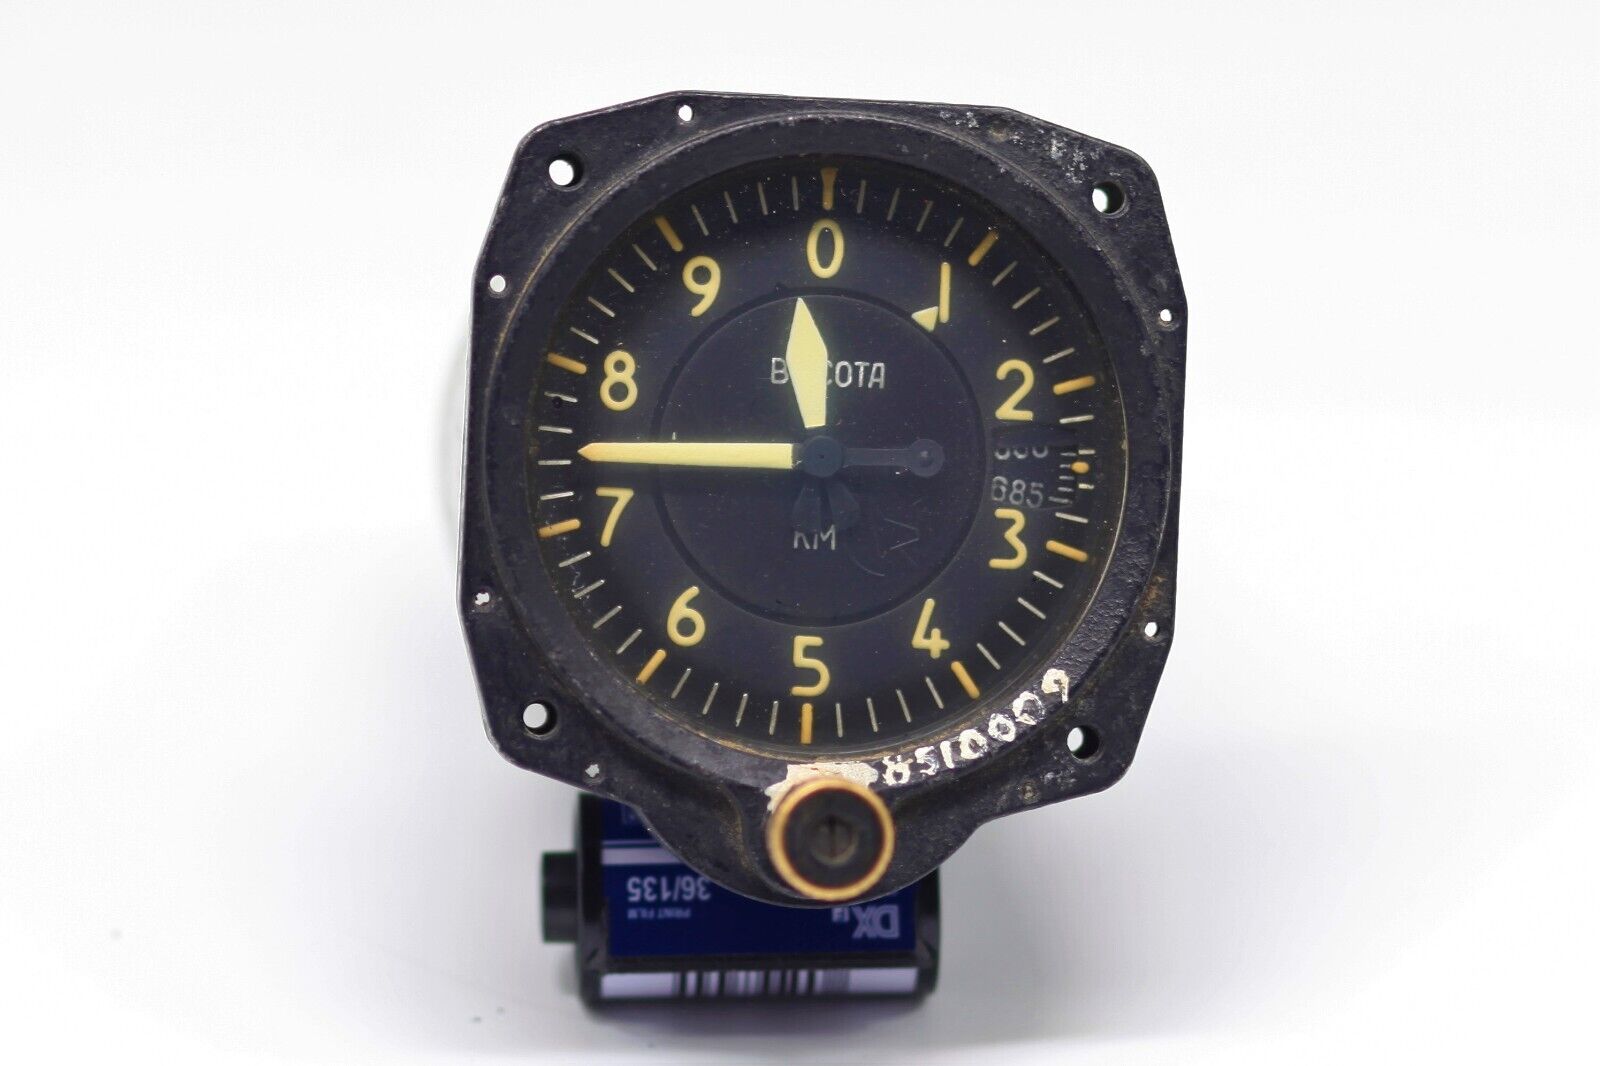 VD-10 Altimeter Vintage USSR Russian Military Aircraft #8510009